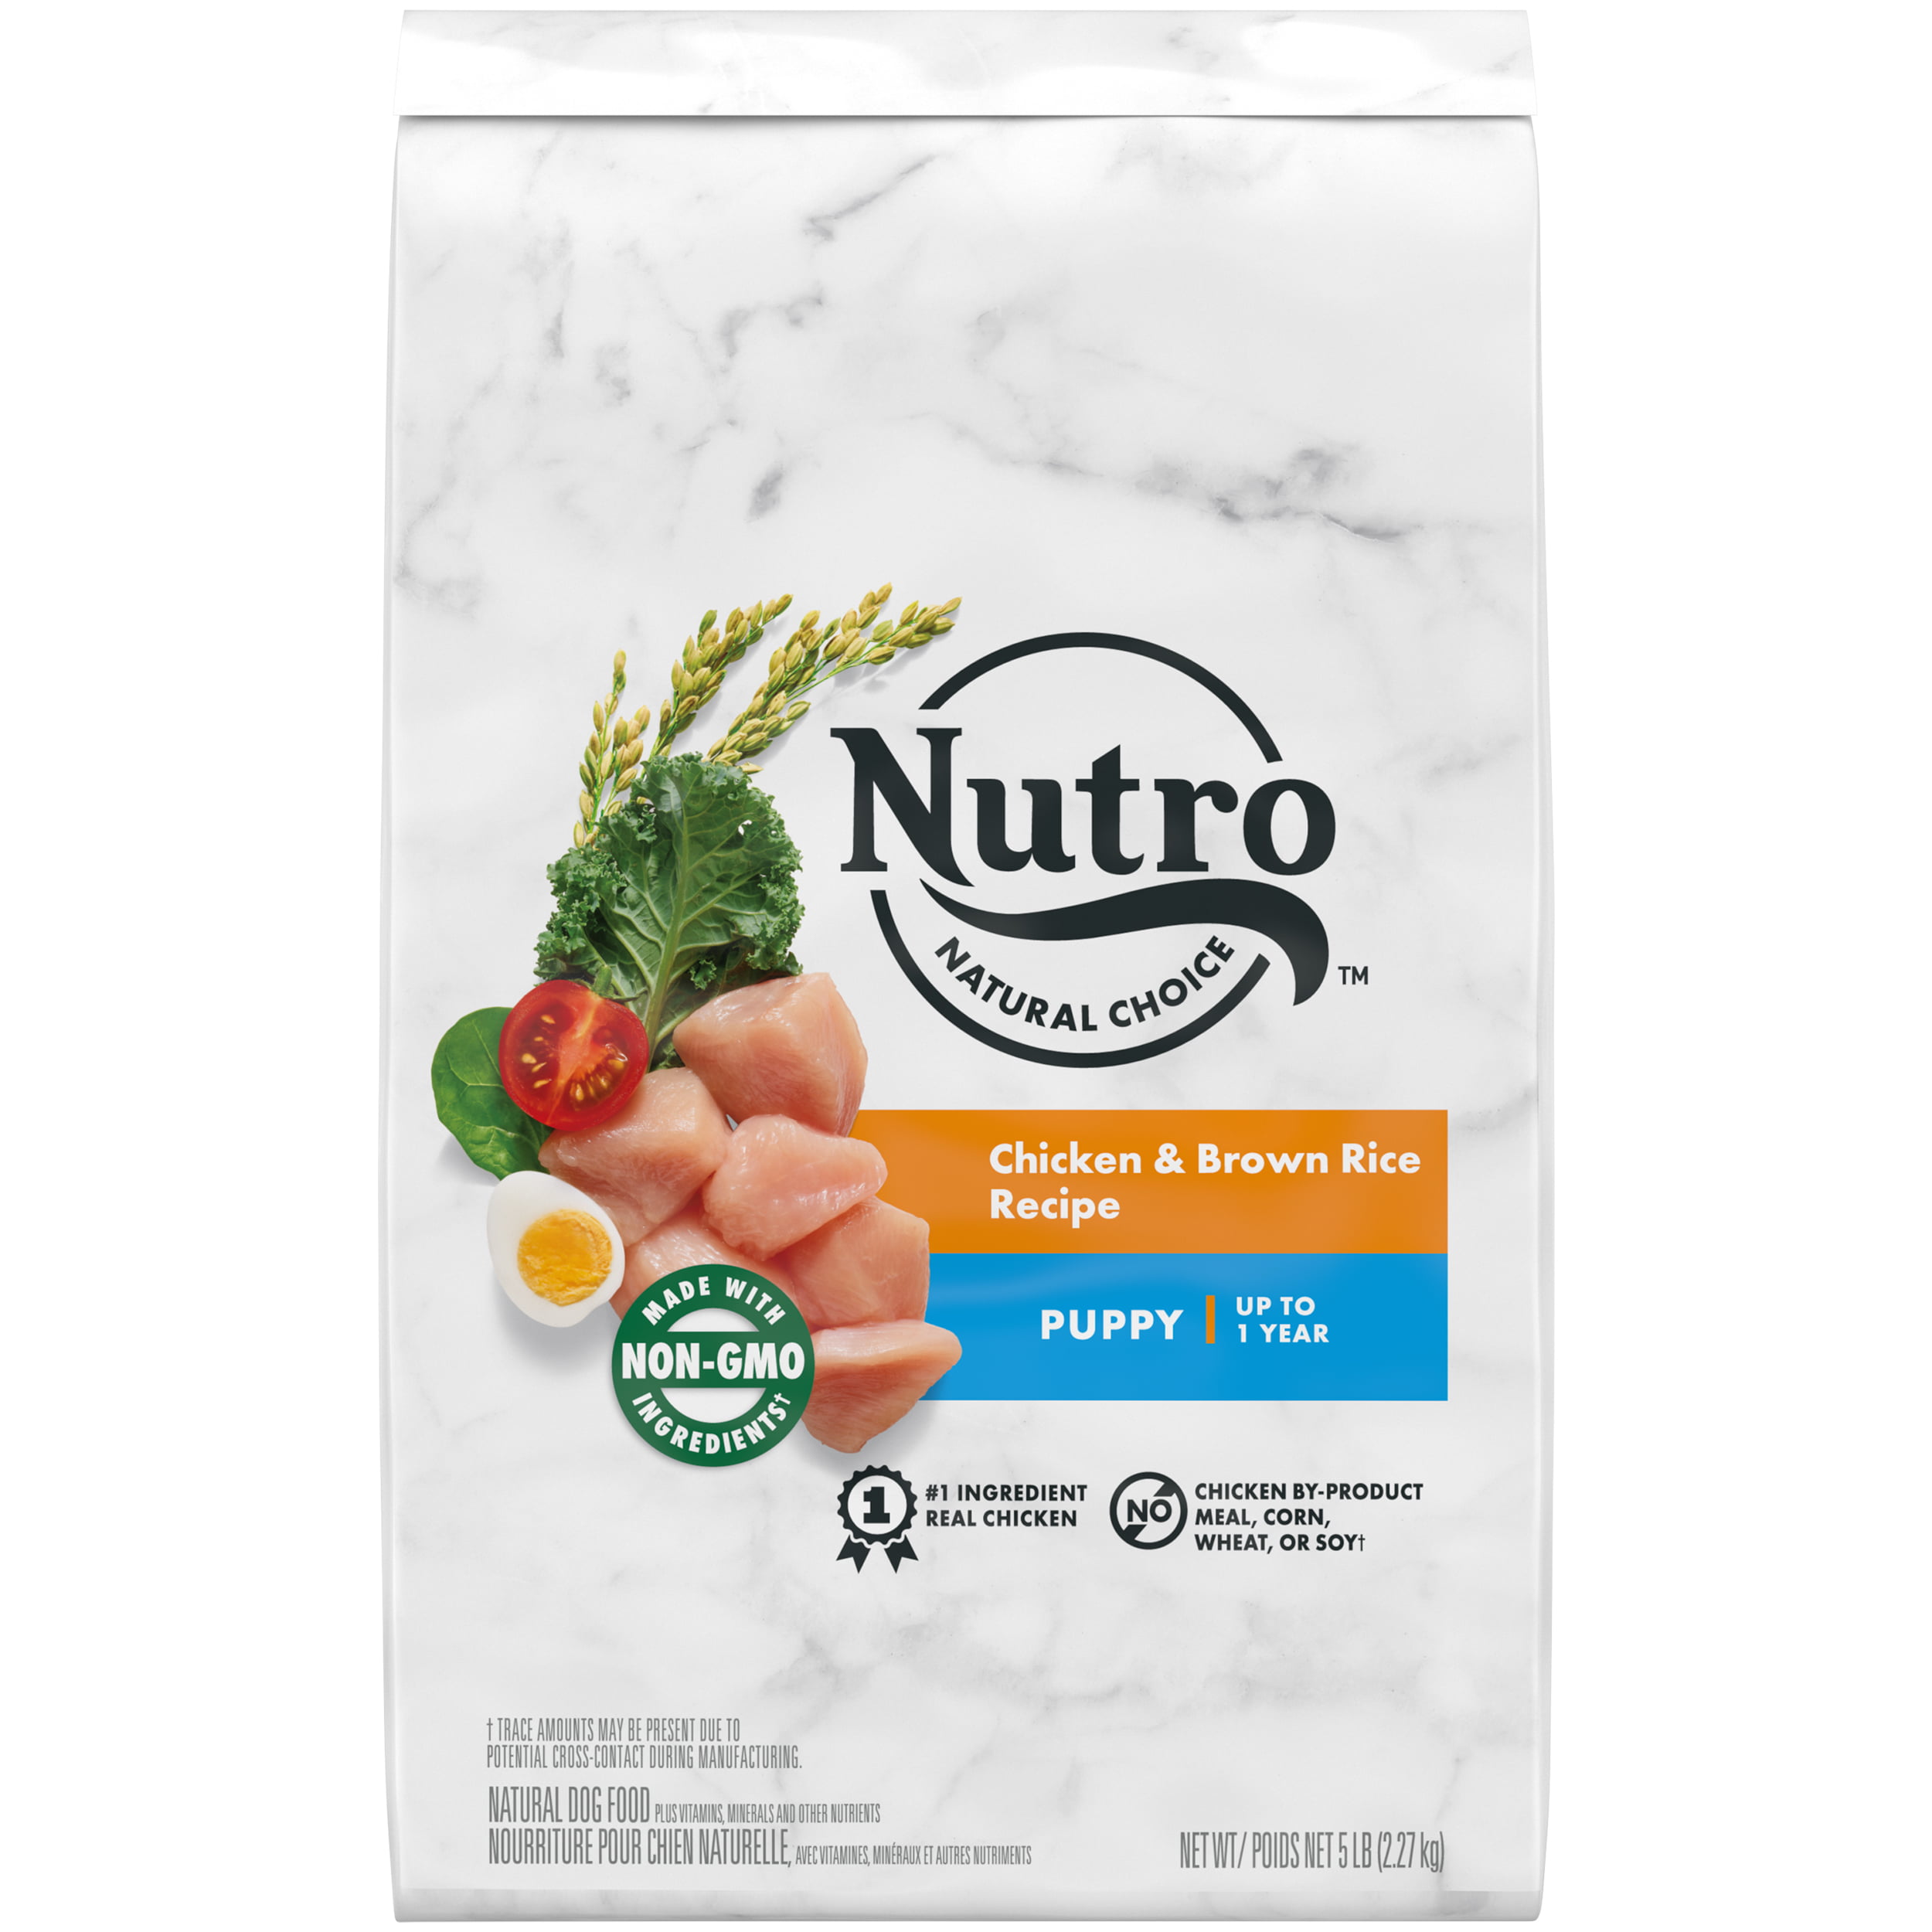 nutro-natural-choice-puppy-dry-dog-food-chicken-brown-rice-recipe